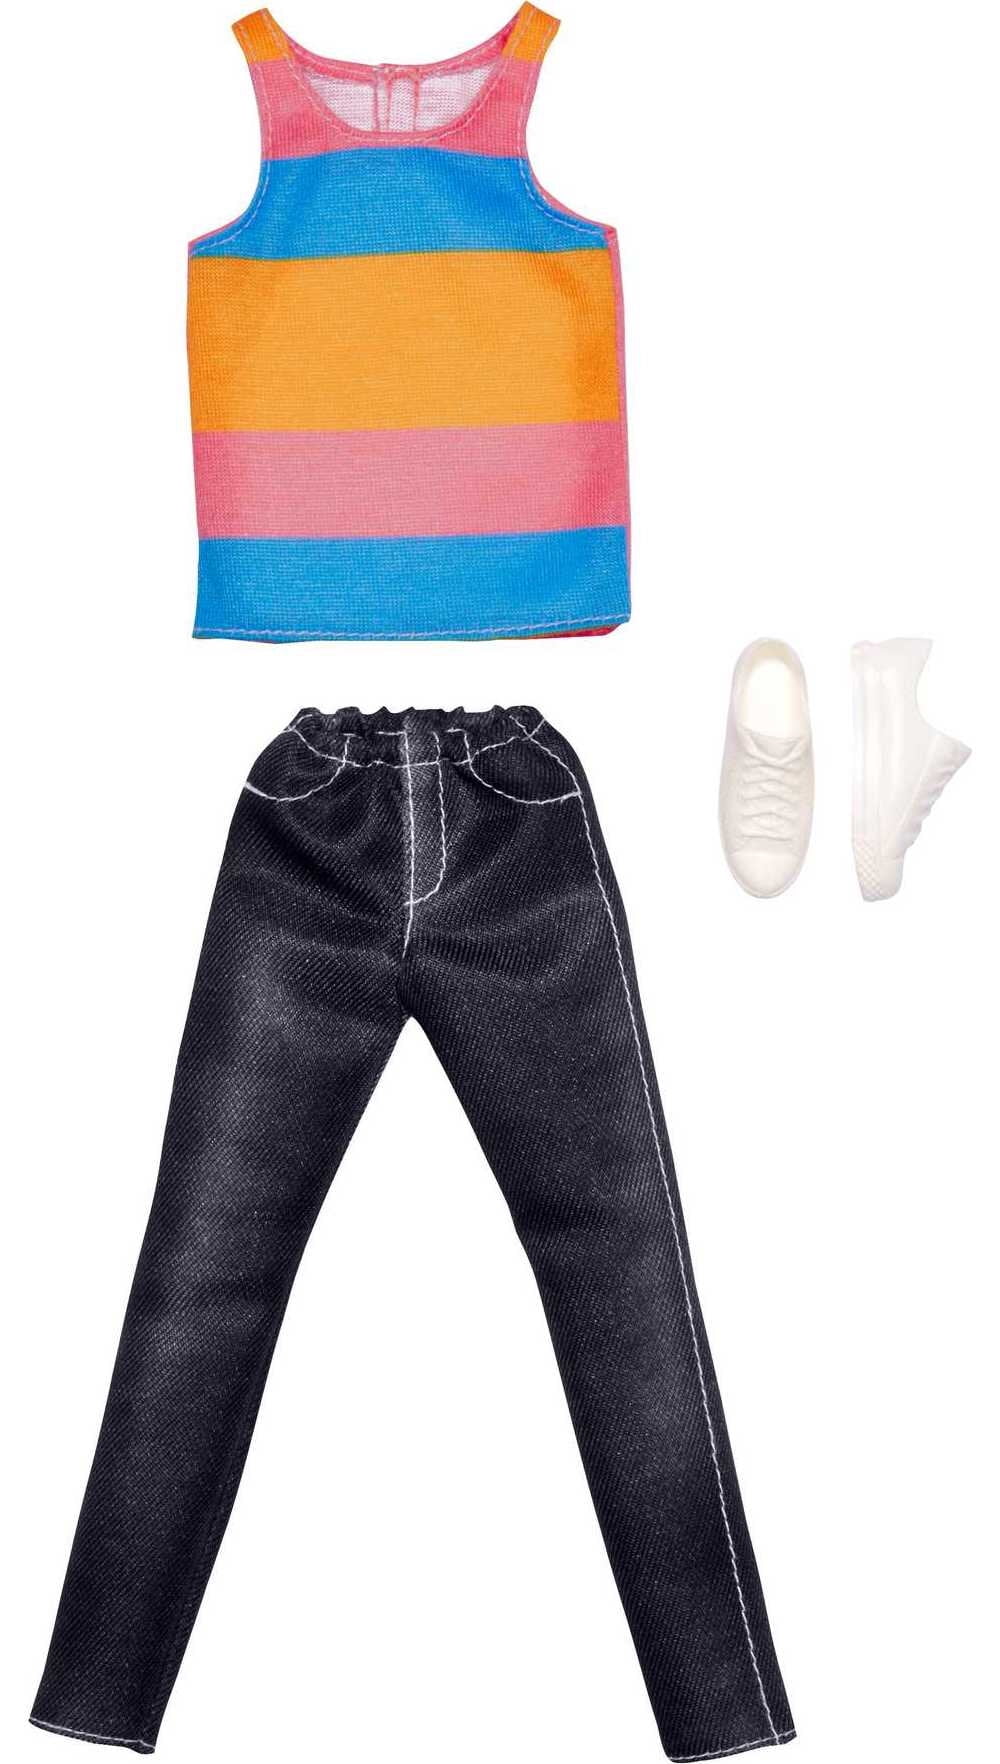 Barbie Fashions Ken Doll Clothes, Set with Striped Tank, Black Denim Pants & Accessory (1 Outfit)